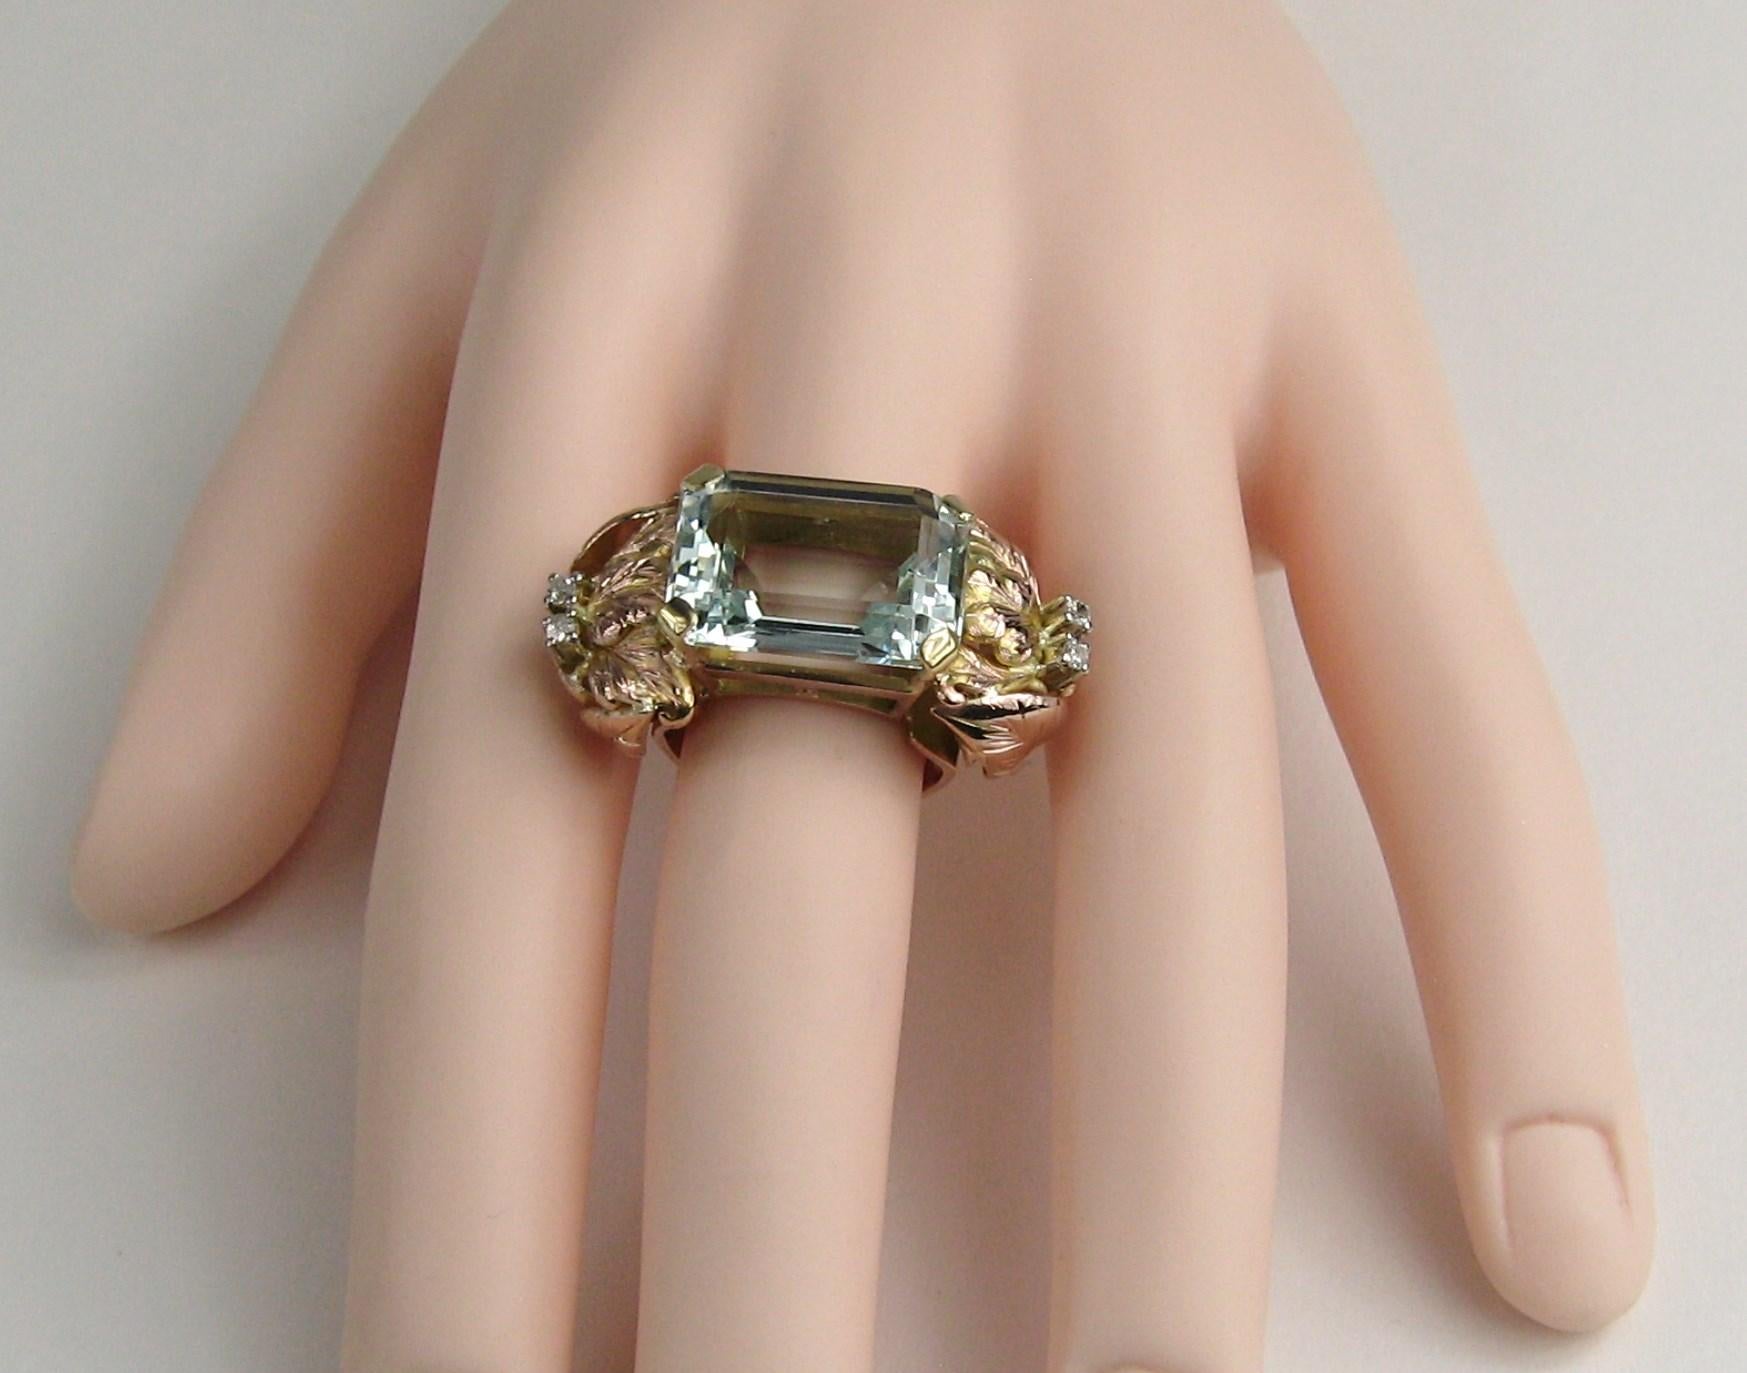 This is a amazing ring. Large Aquamarine approximately 13.75 Carats set in a stunning 14K gold basket setting with leaf accents (mixed rose gold & Yellow Gold) with diamond accents on both sides. Ring is a size 7.5 and can be sized by us or your